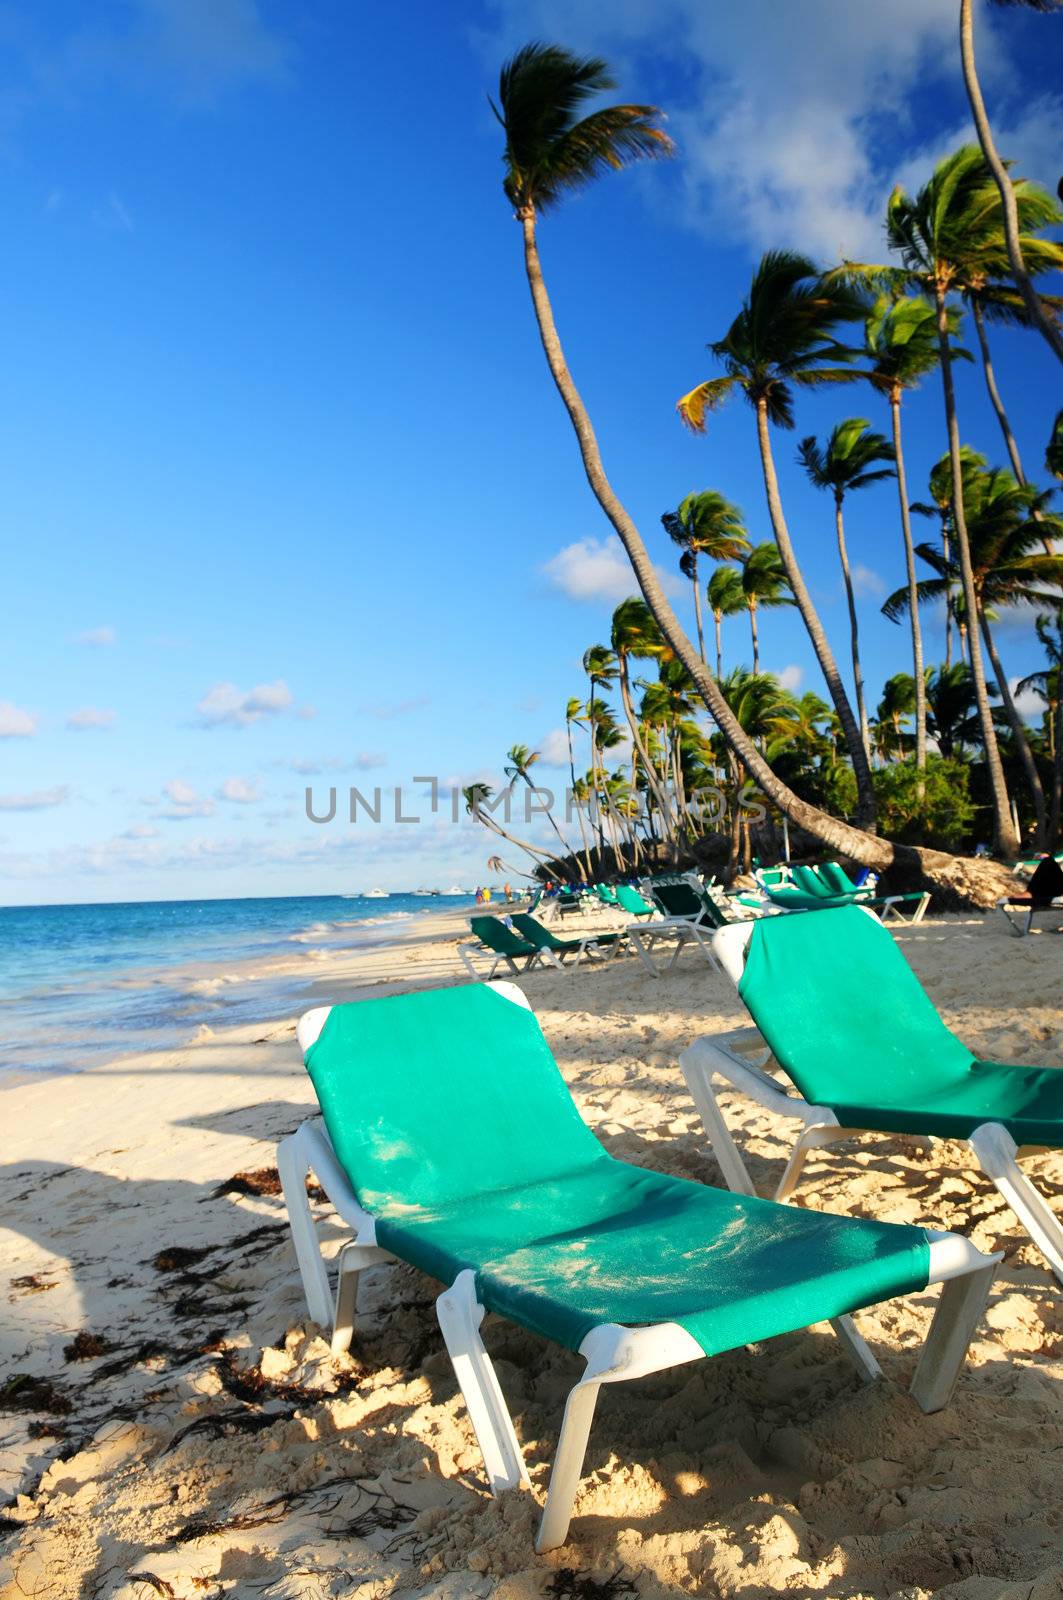 Sandy beach of tropical resort with palm trees and reclining chairs